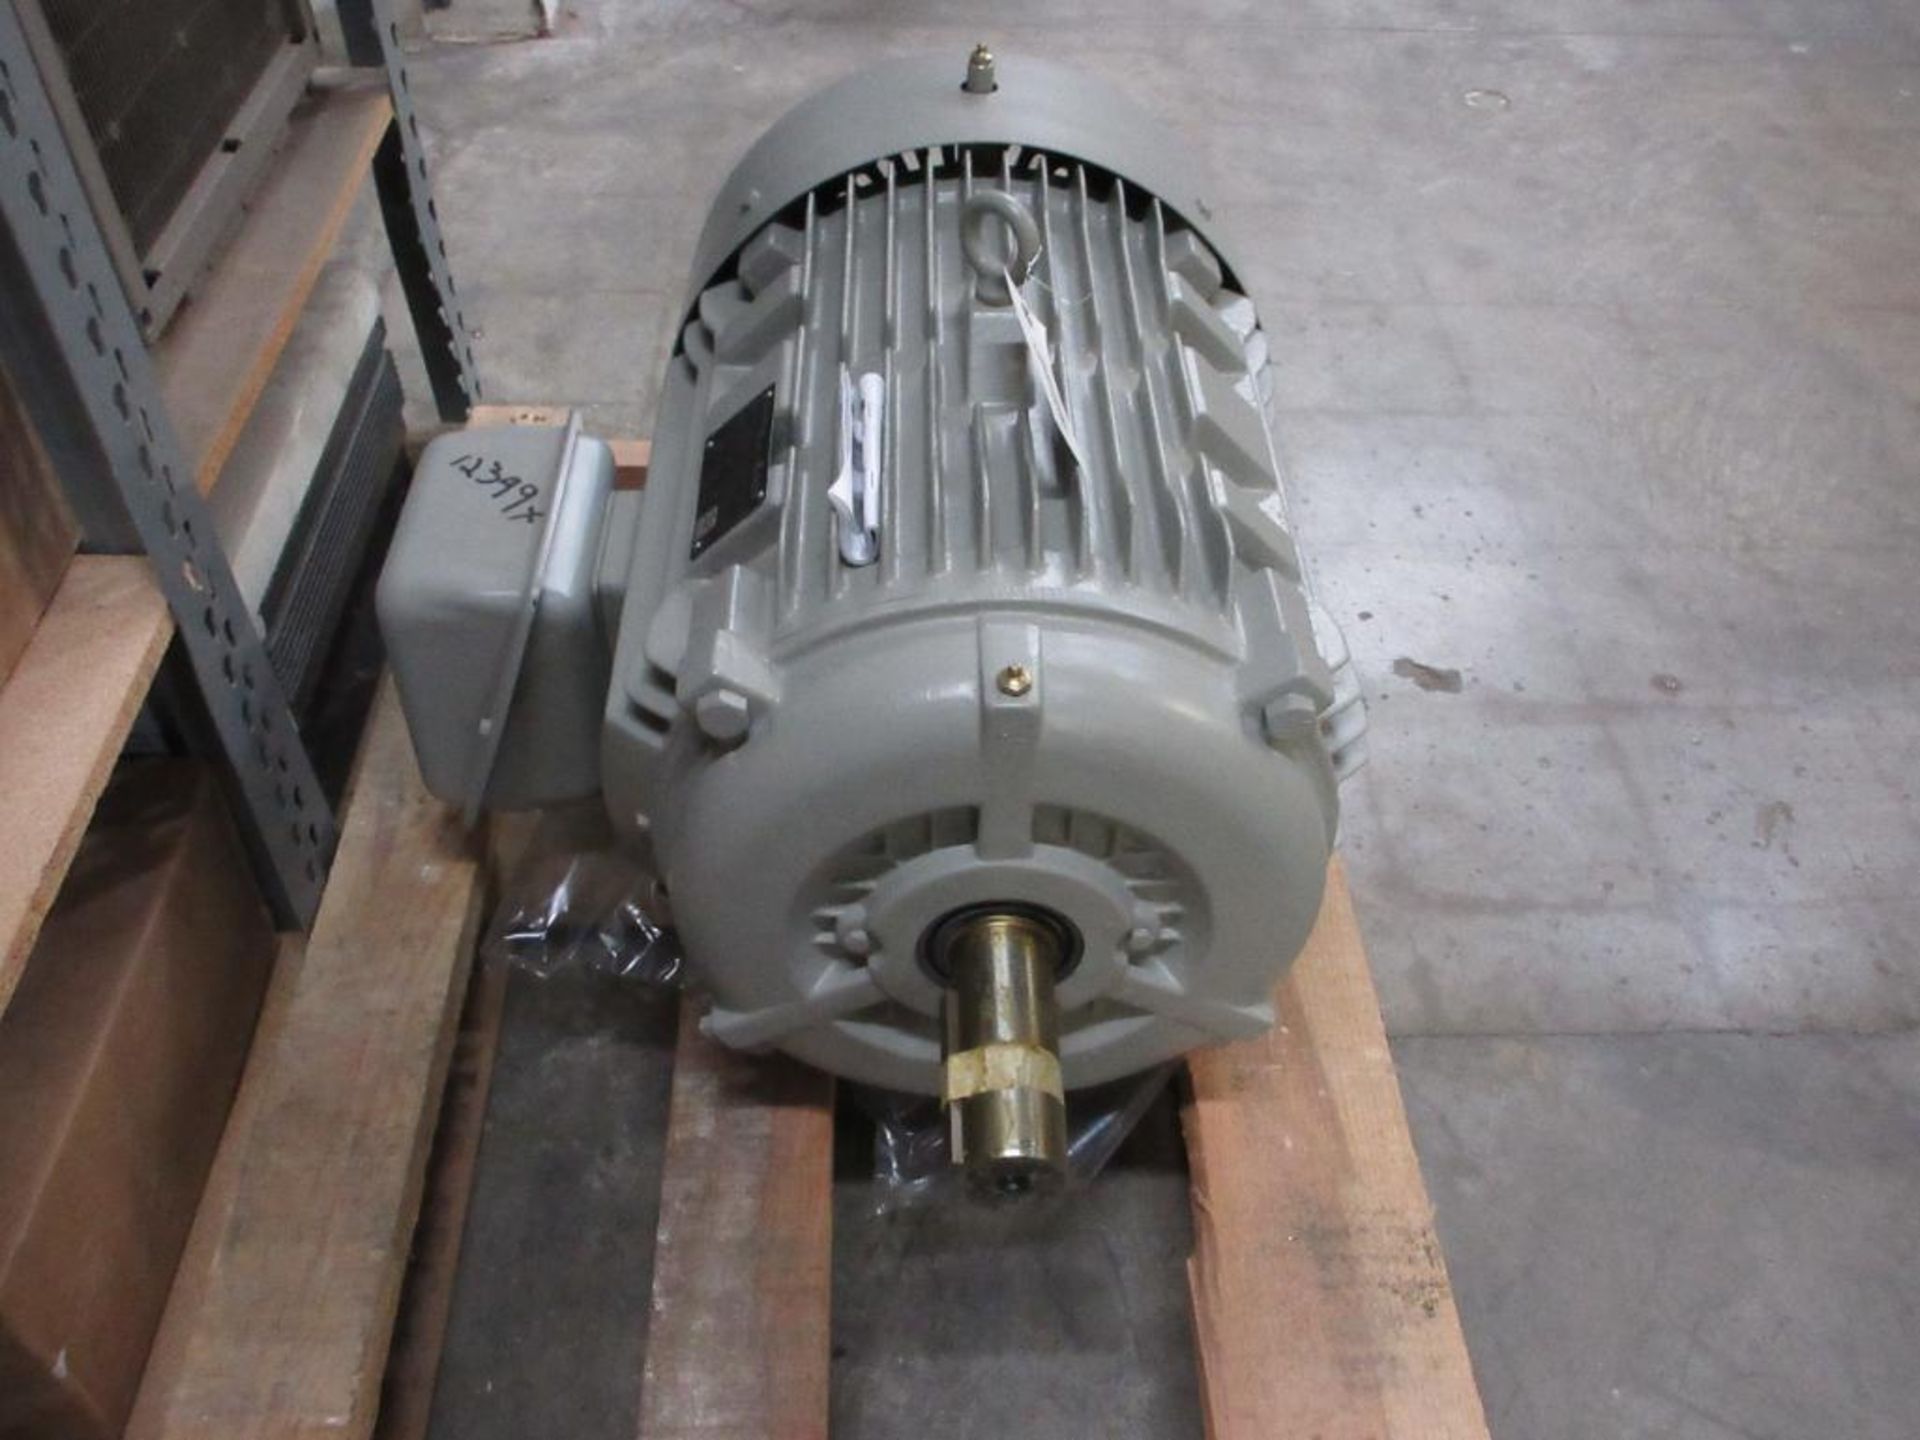 SIEMENS MOTOR 40HP 3 PHASE 1800RPM FRAME 324T P/N 1LE22213AB116AA3 TYPE GP100 (THIS LOT IS FOB CAMAR - Image 2 of 9